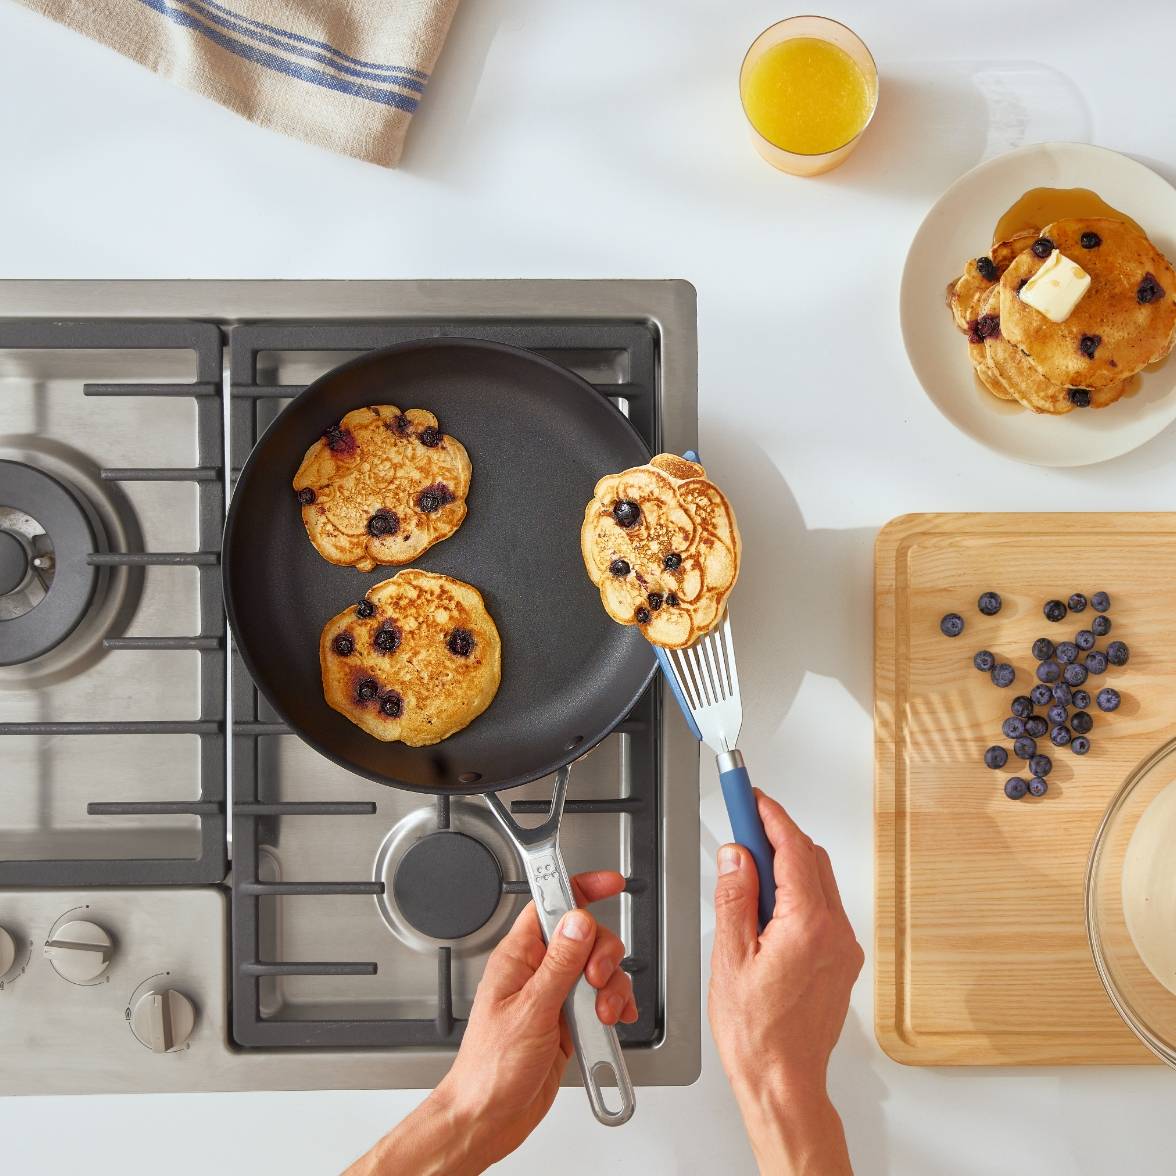 A bird’s eye view of a Misen Nonstick Pan on a stovetop with a chef’s hand flipping blueberry pancakes in it. A stack of pancakes sits on a plate to the right of the stovetop.